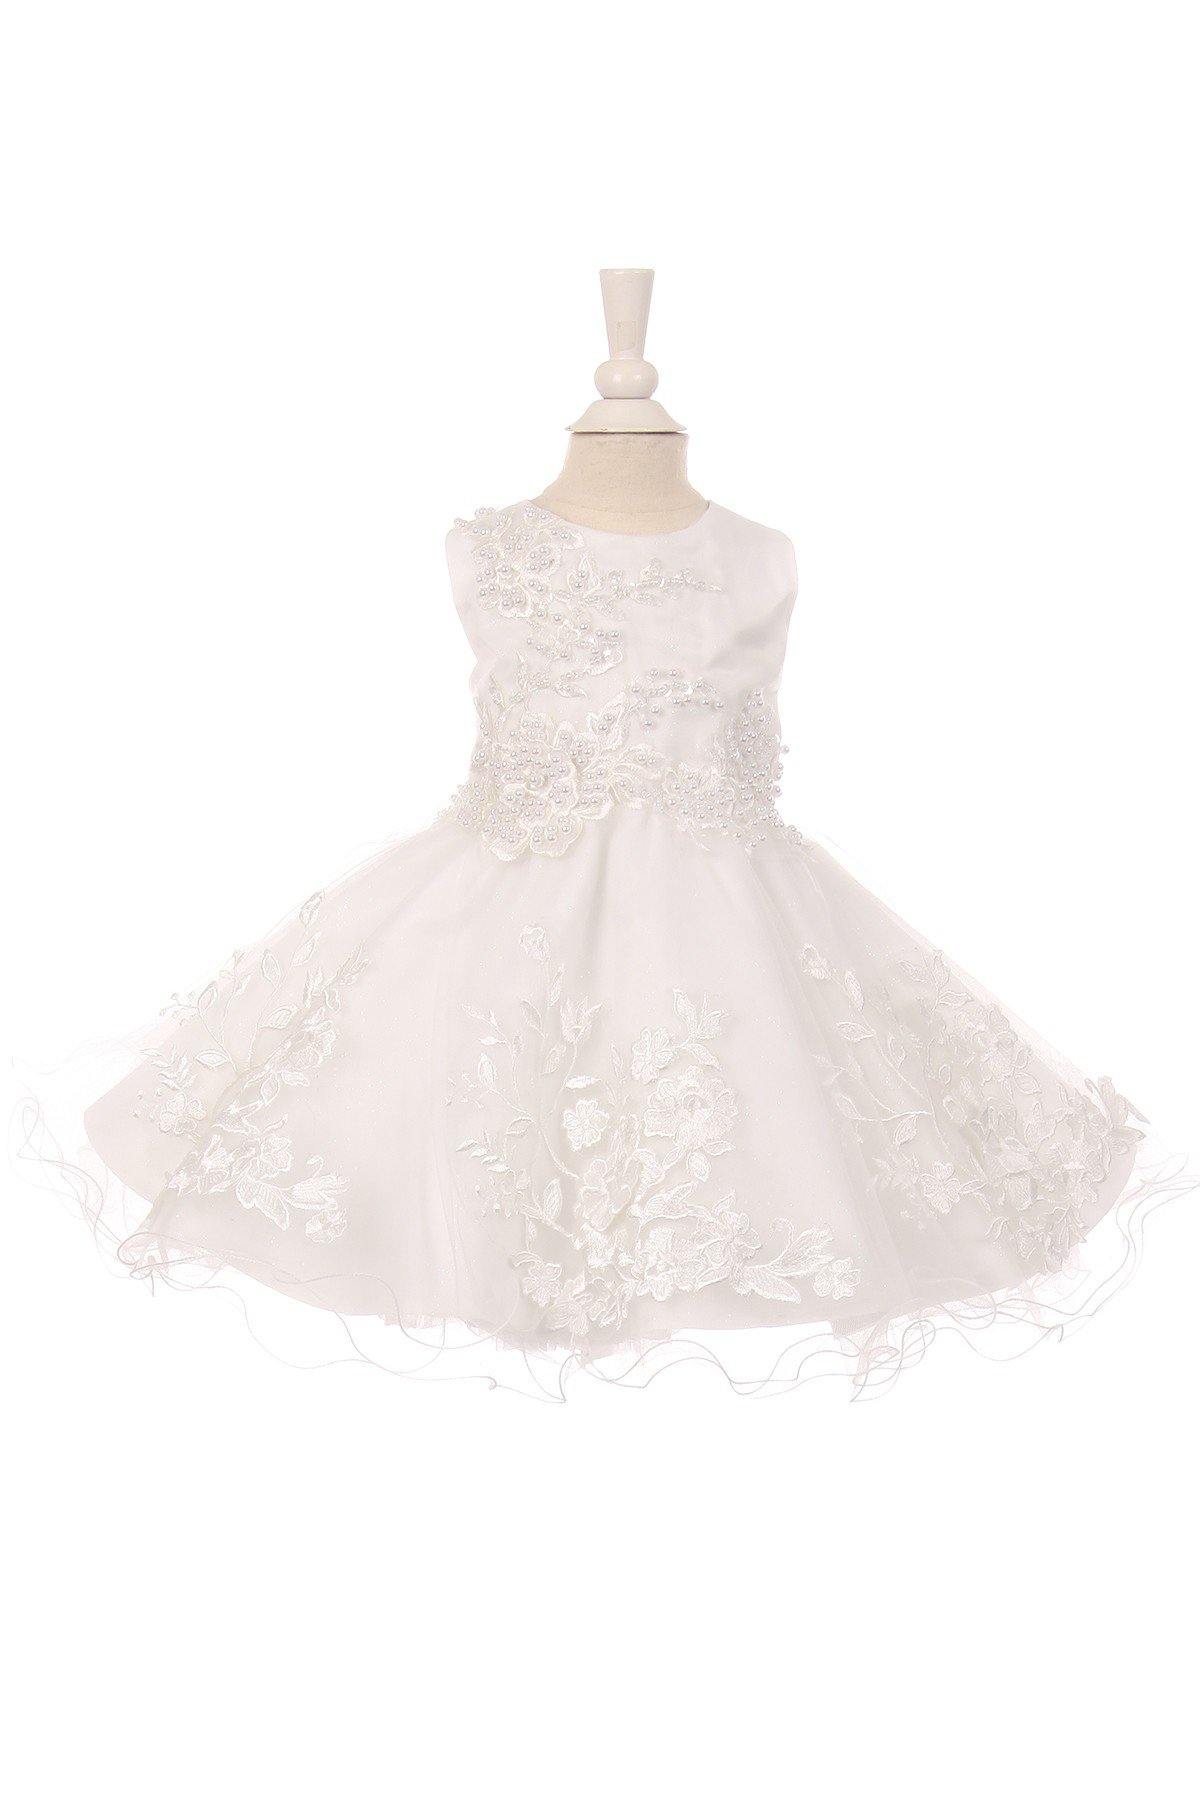 Sleeveless Embroidered Design Flower Girls Dress - The Dress Outlet Cinderella Couture